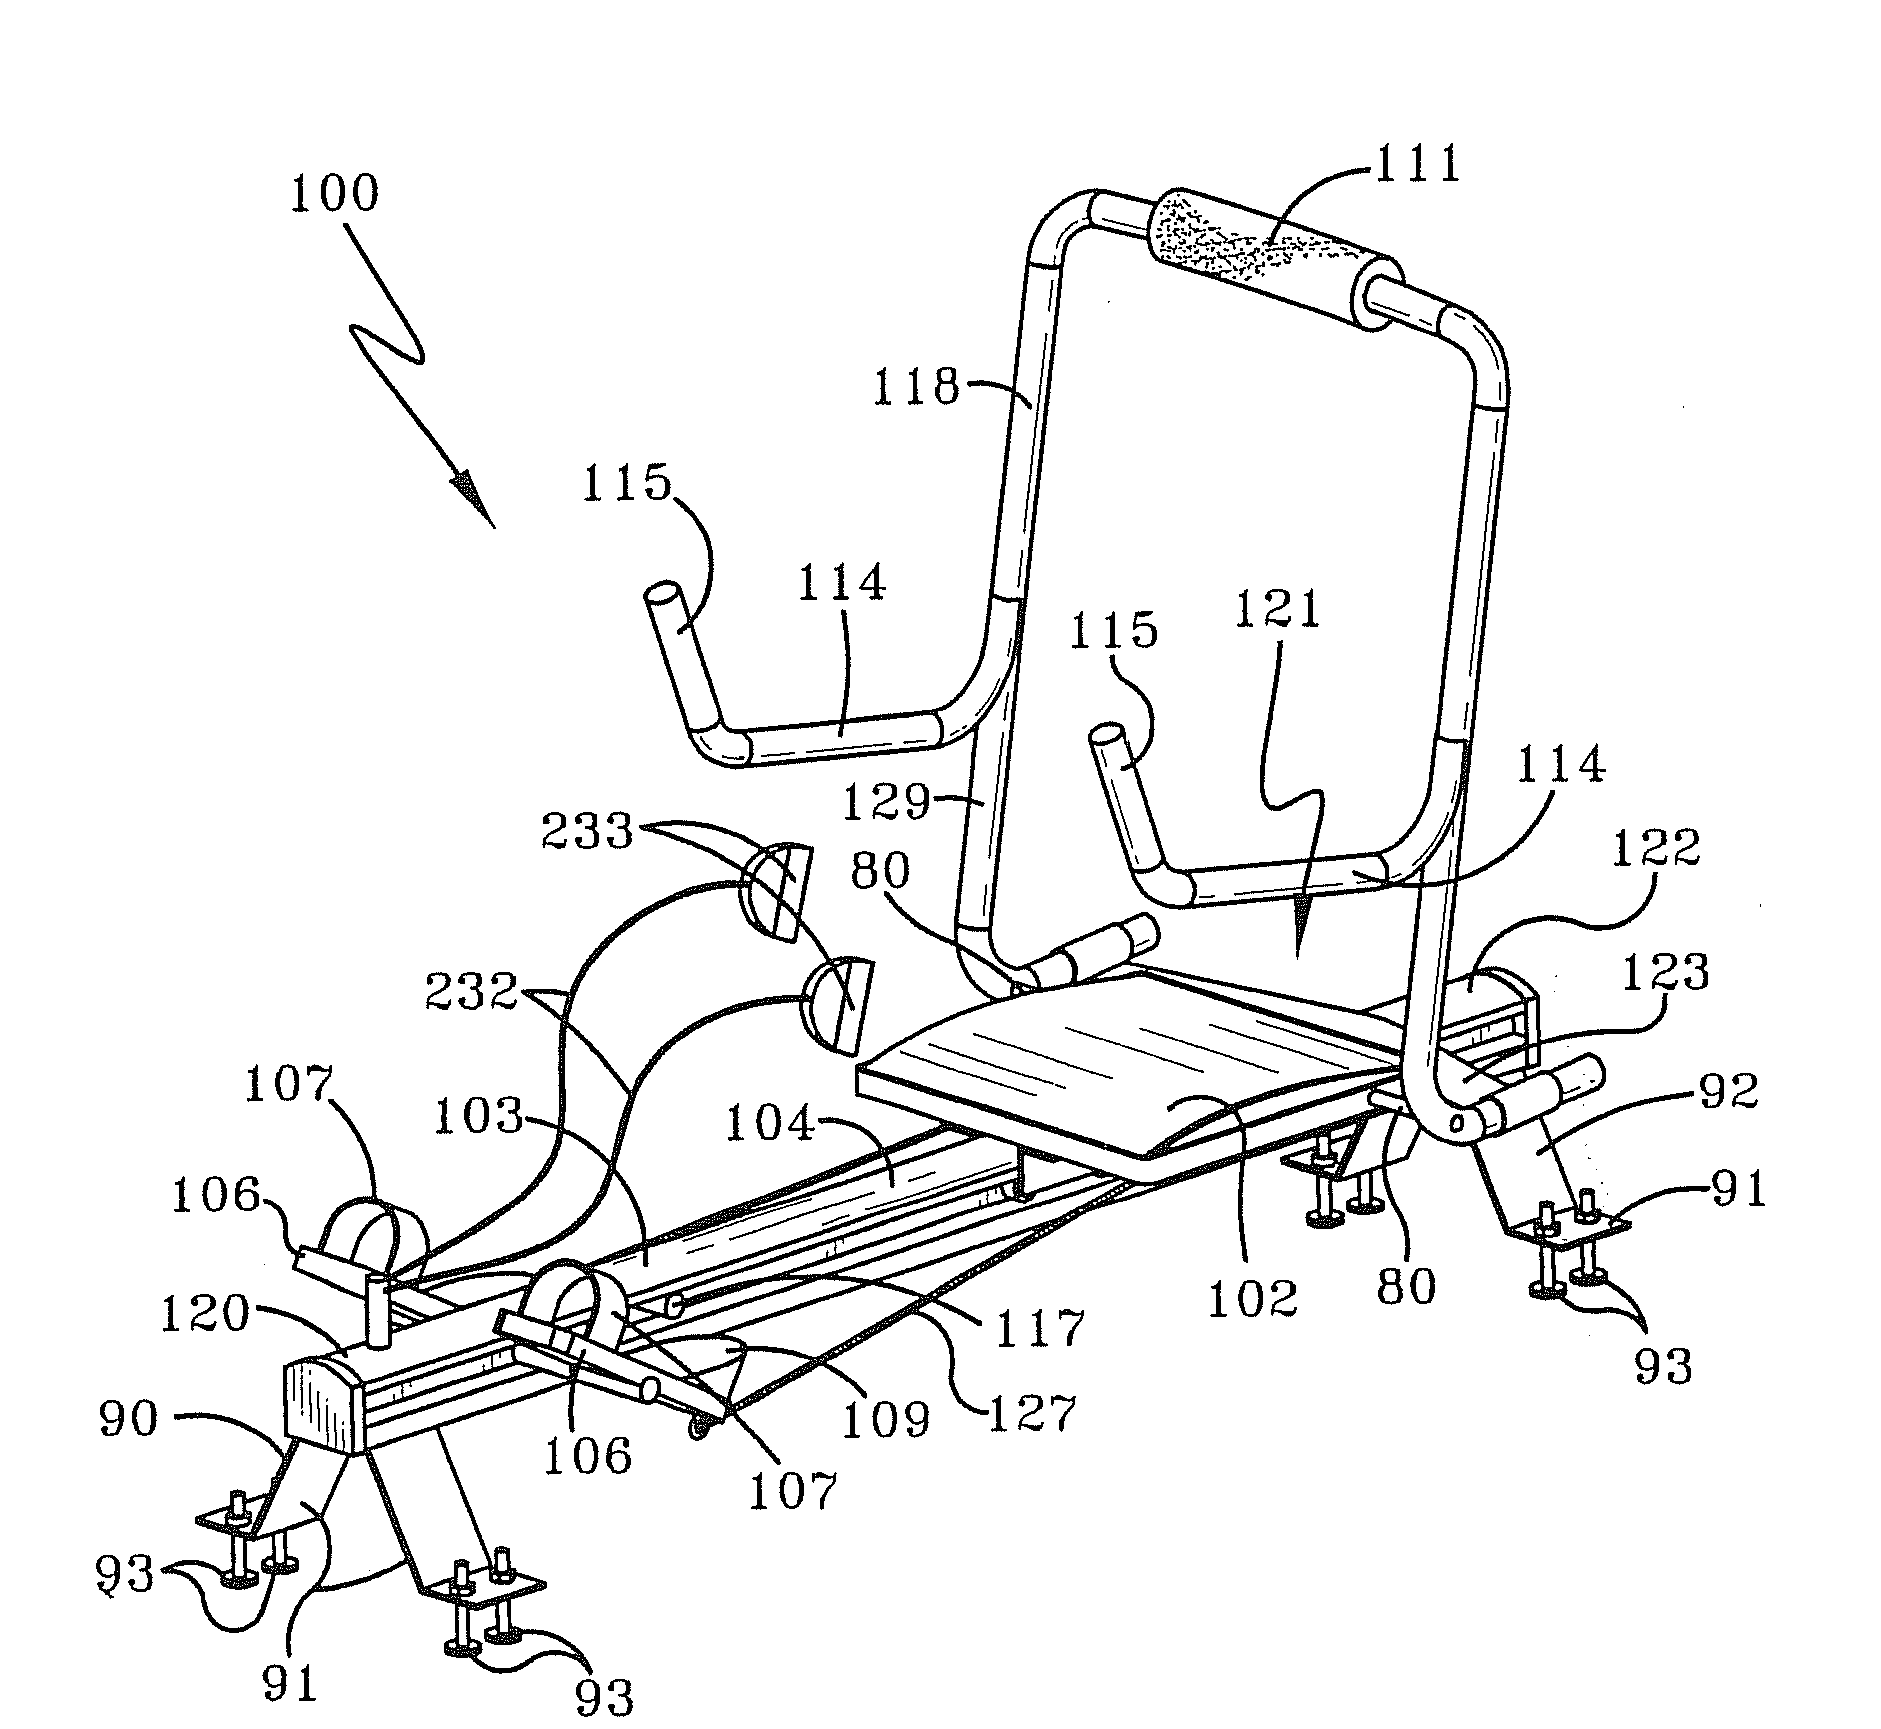 Method and apparatus for targeting abdominal muscles while receiving a cardiovascular workout